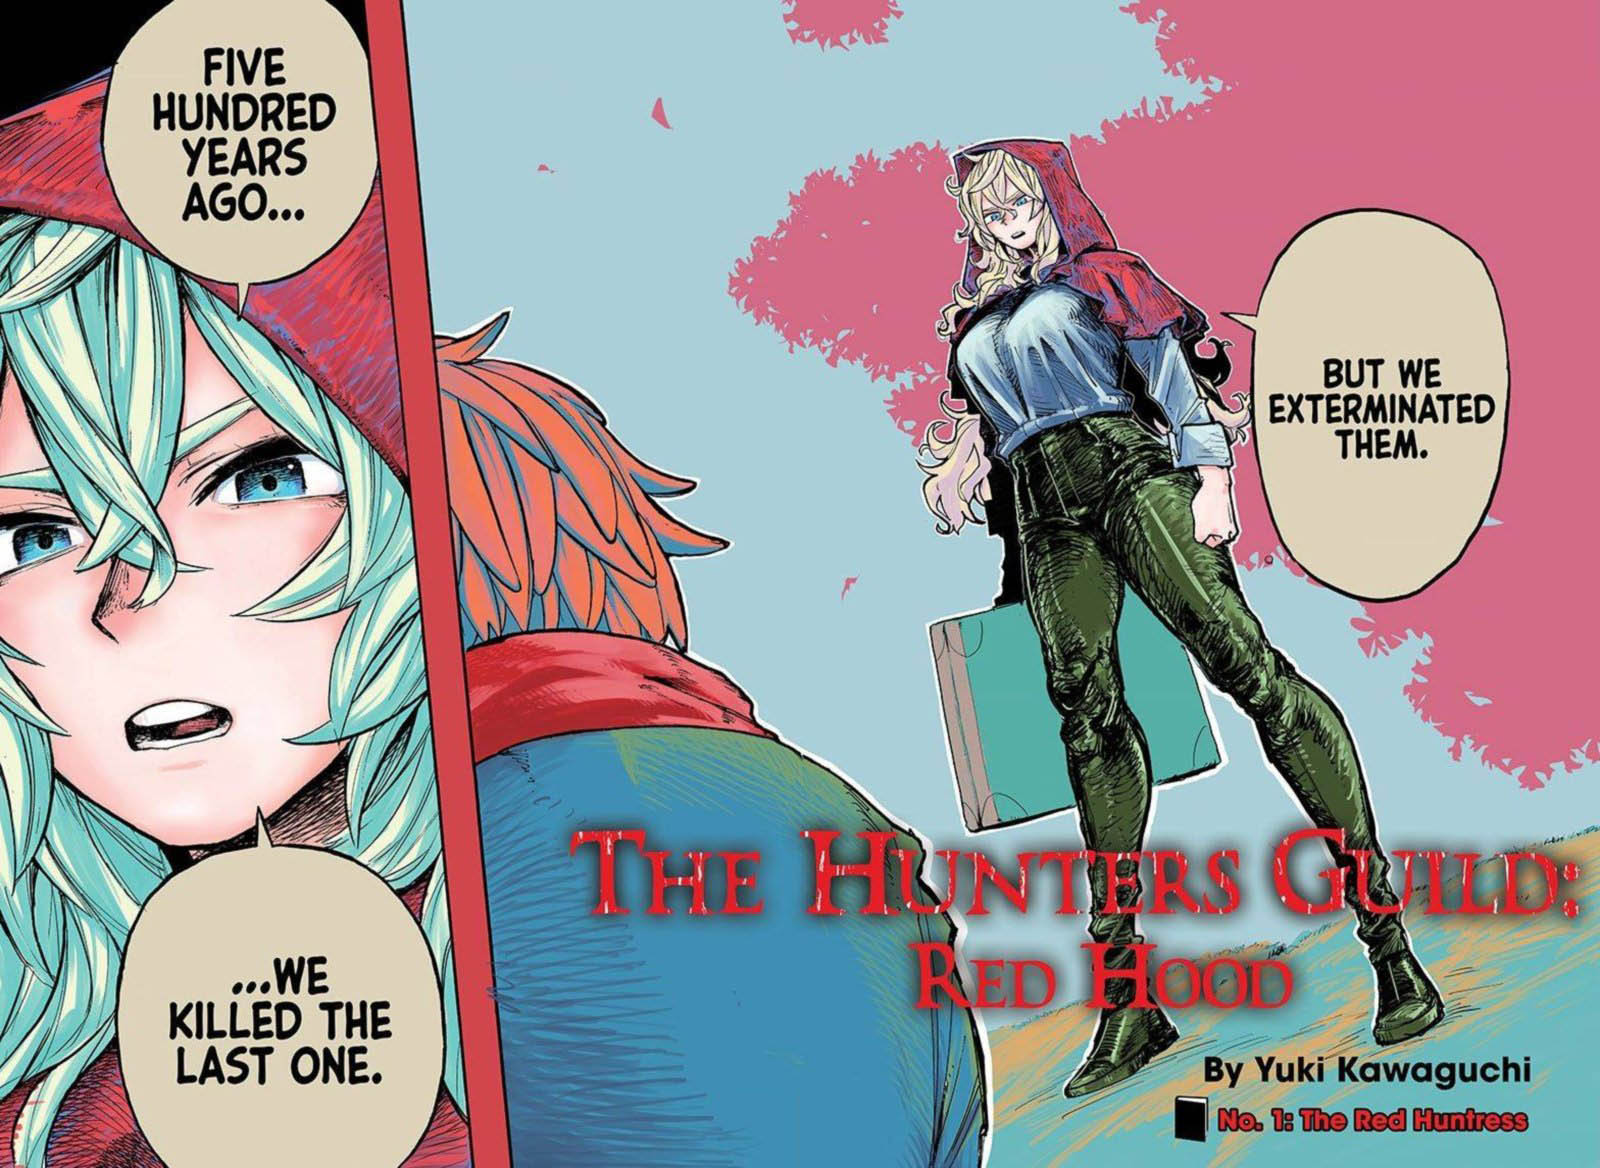 The Hunters Guild Red Hood Chapter 1 Page 2